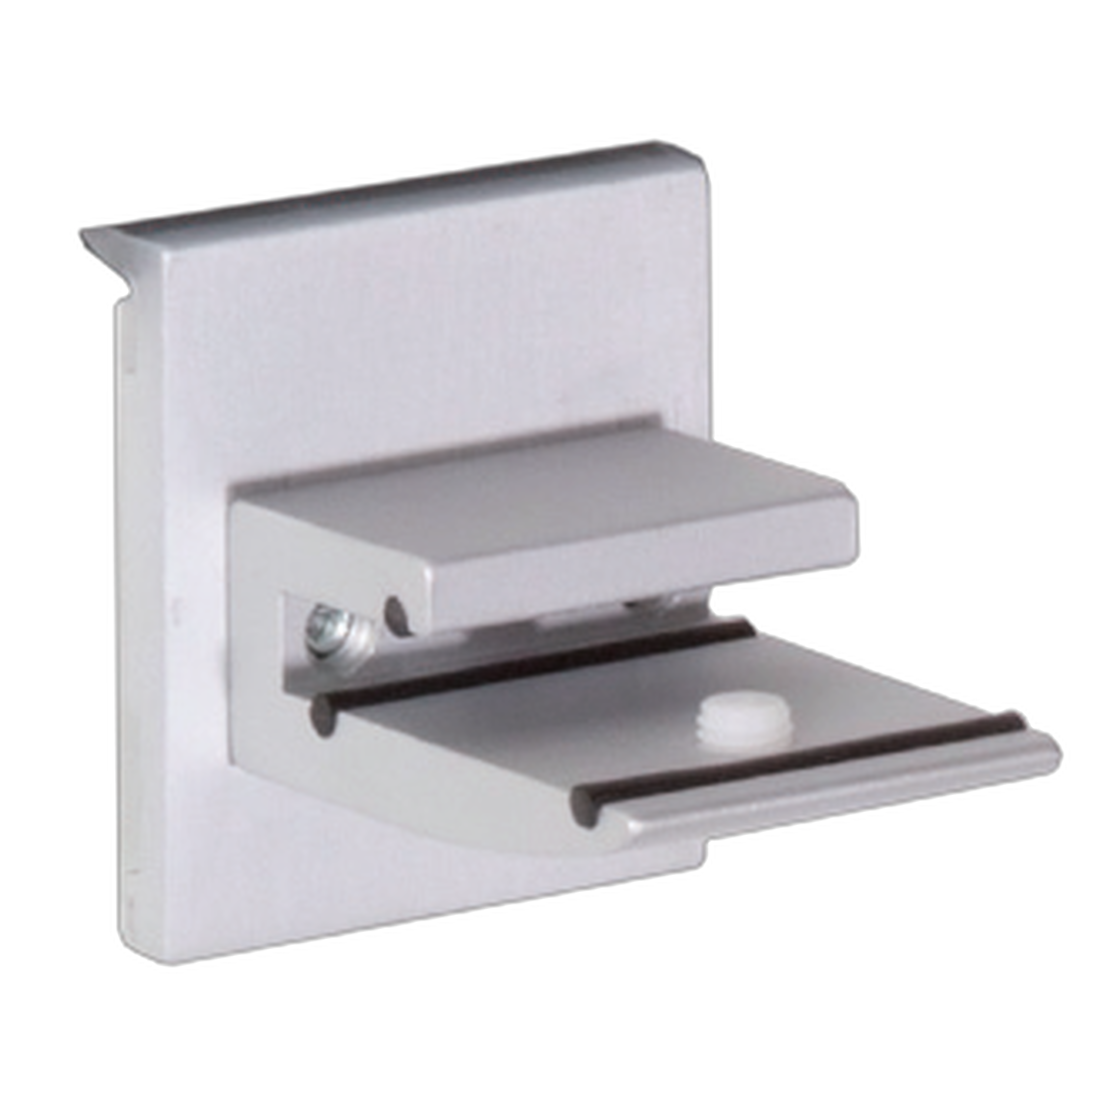 Glass shelf clamp for 6mm, 50mm